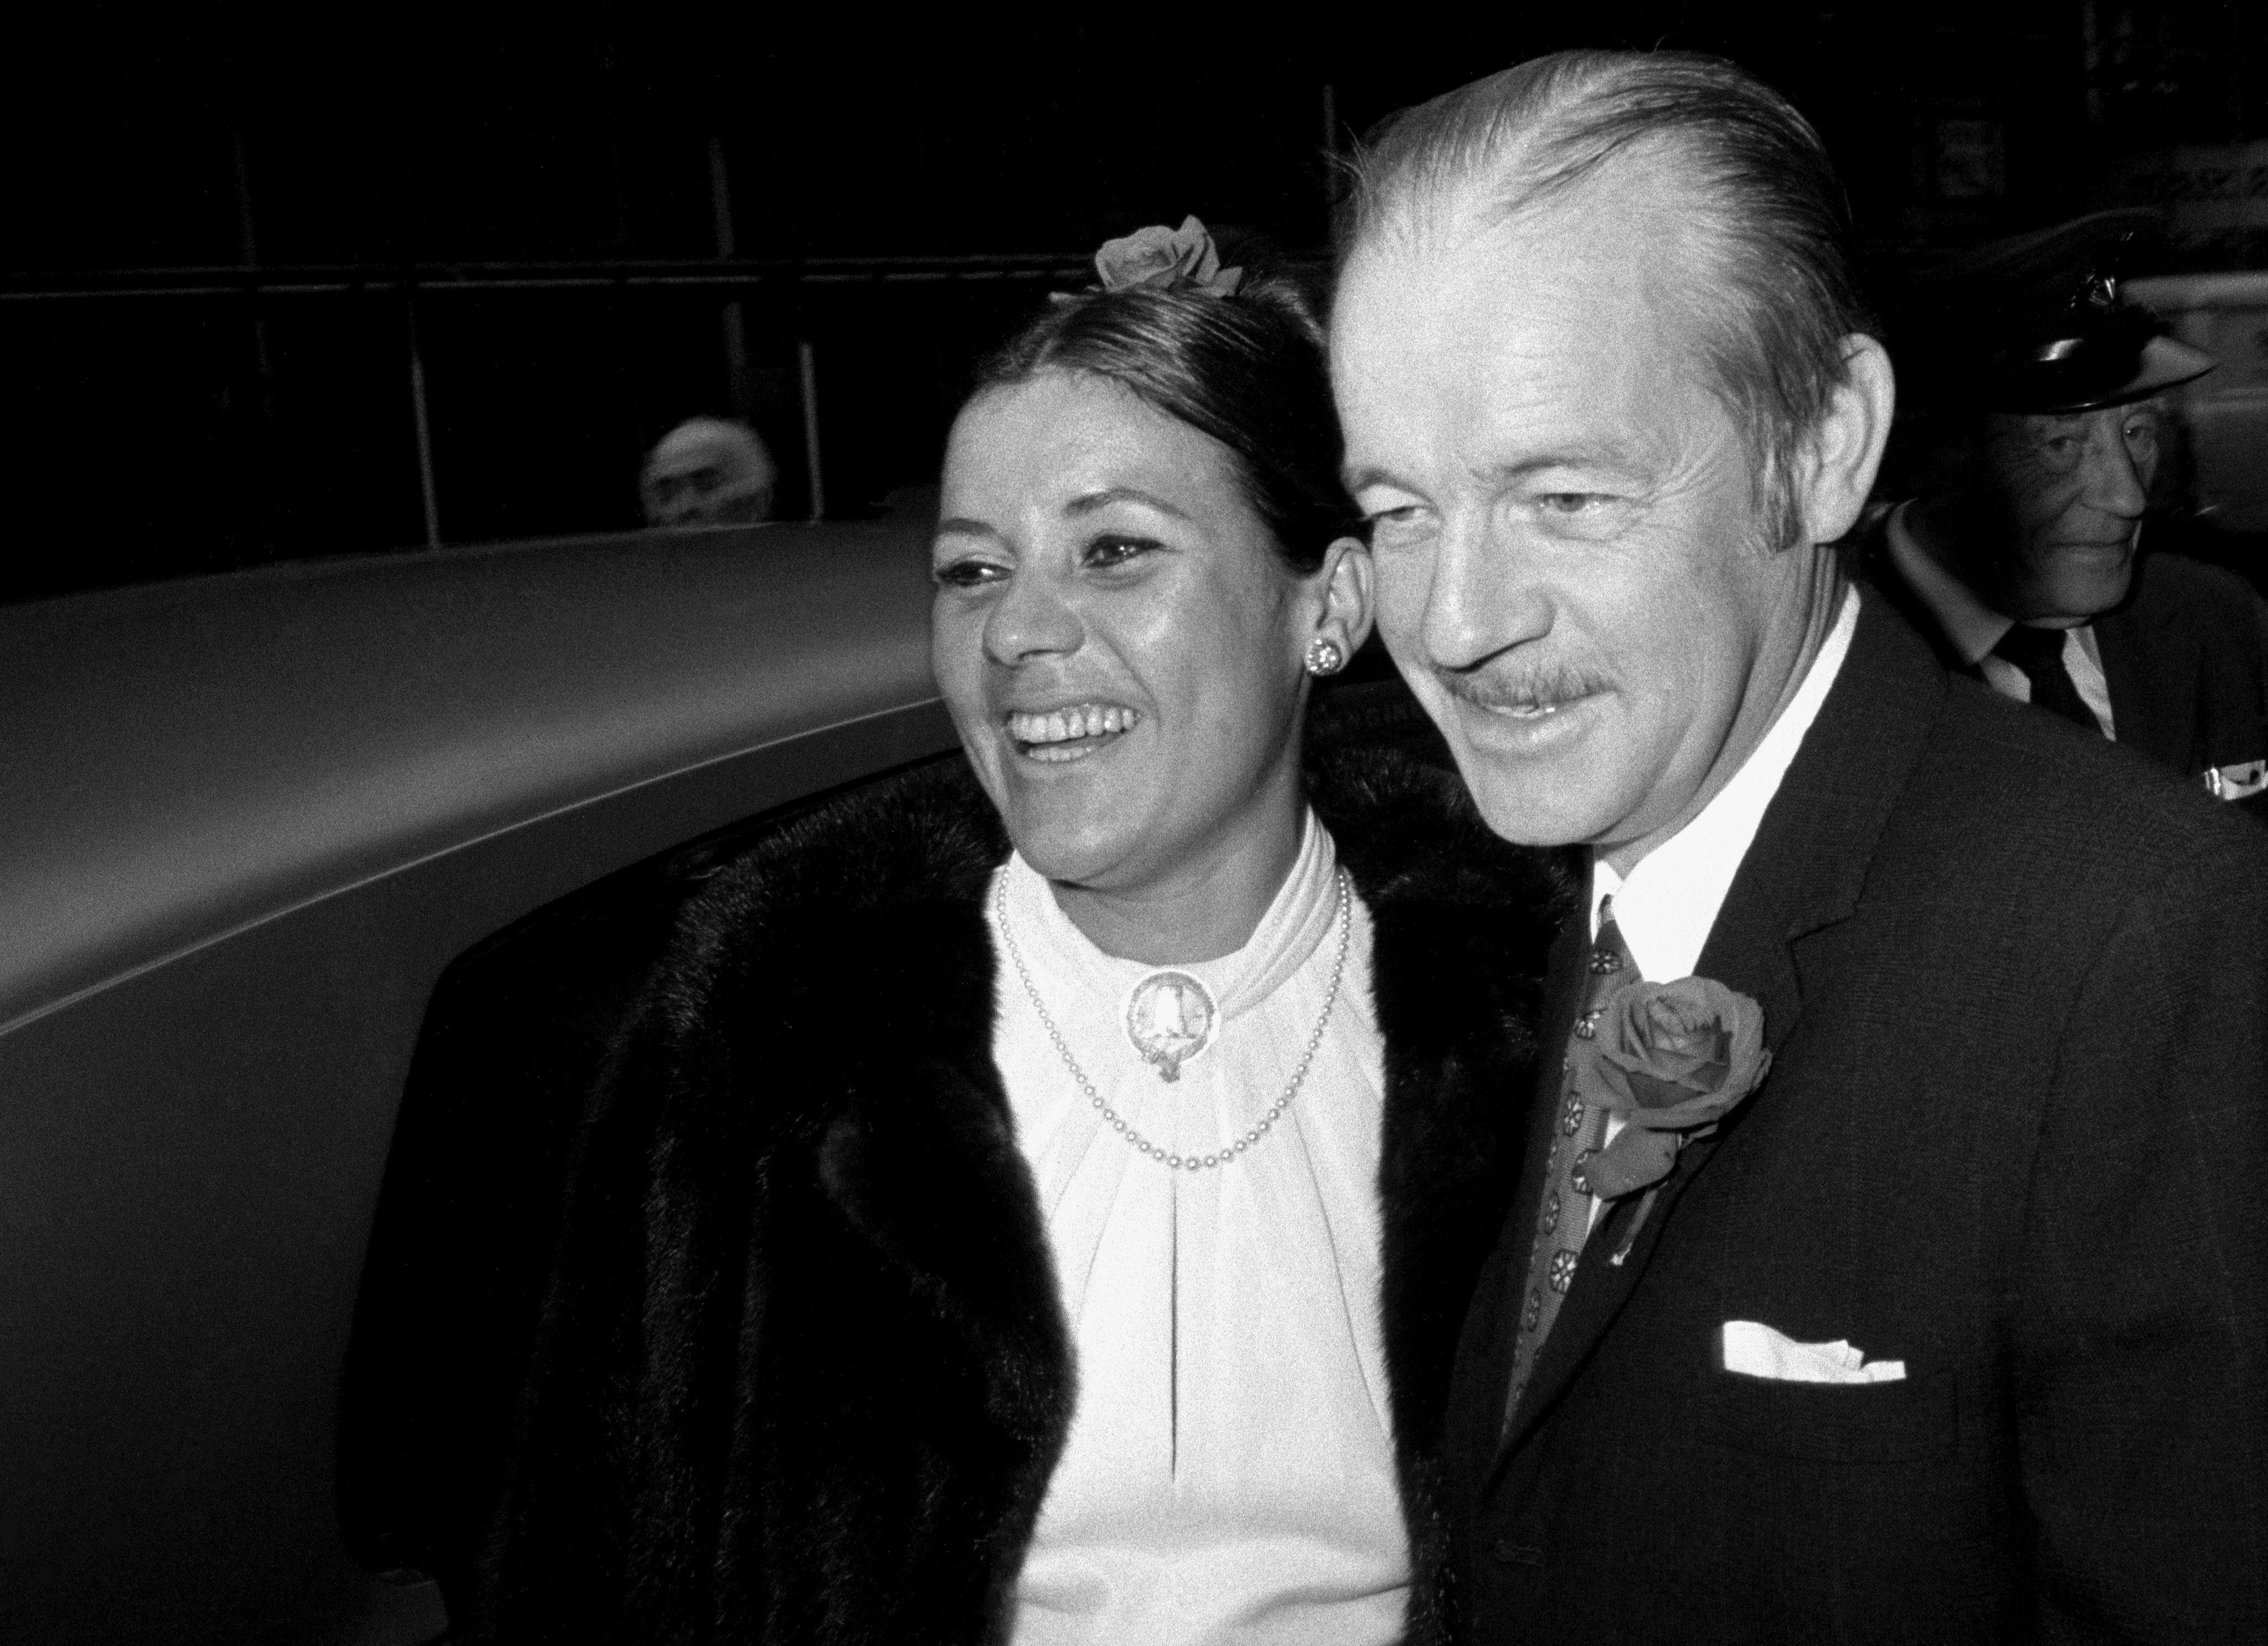 Alistair Maclean with his new wife Marcelle Georgeus. Married on 13 October 1972. They divorced in 1977.